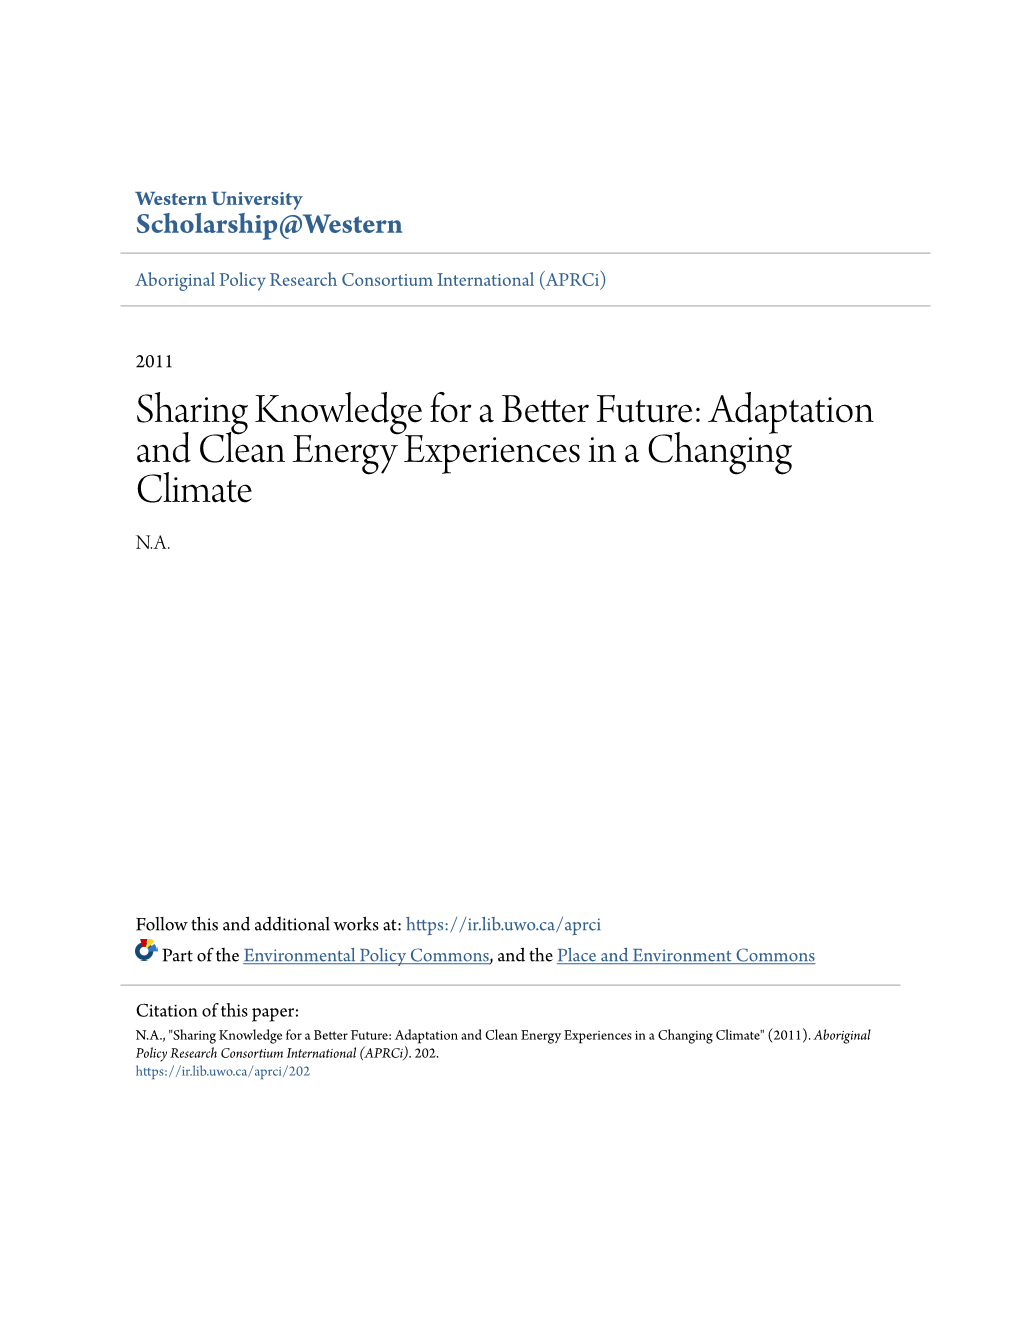 Sharing Knowledge for a Better Future: Adaptation and Clean Energy Experiences in a Changing Climate N.A